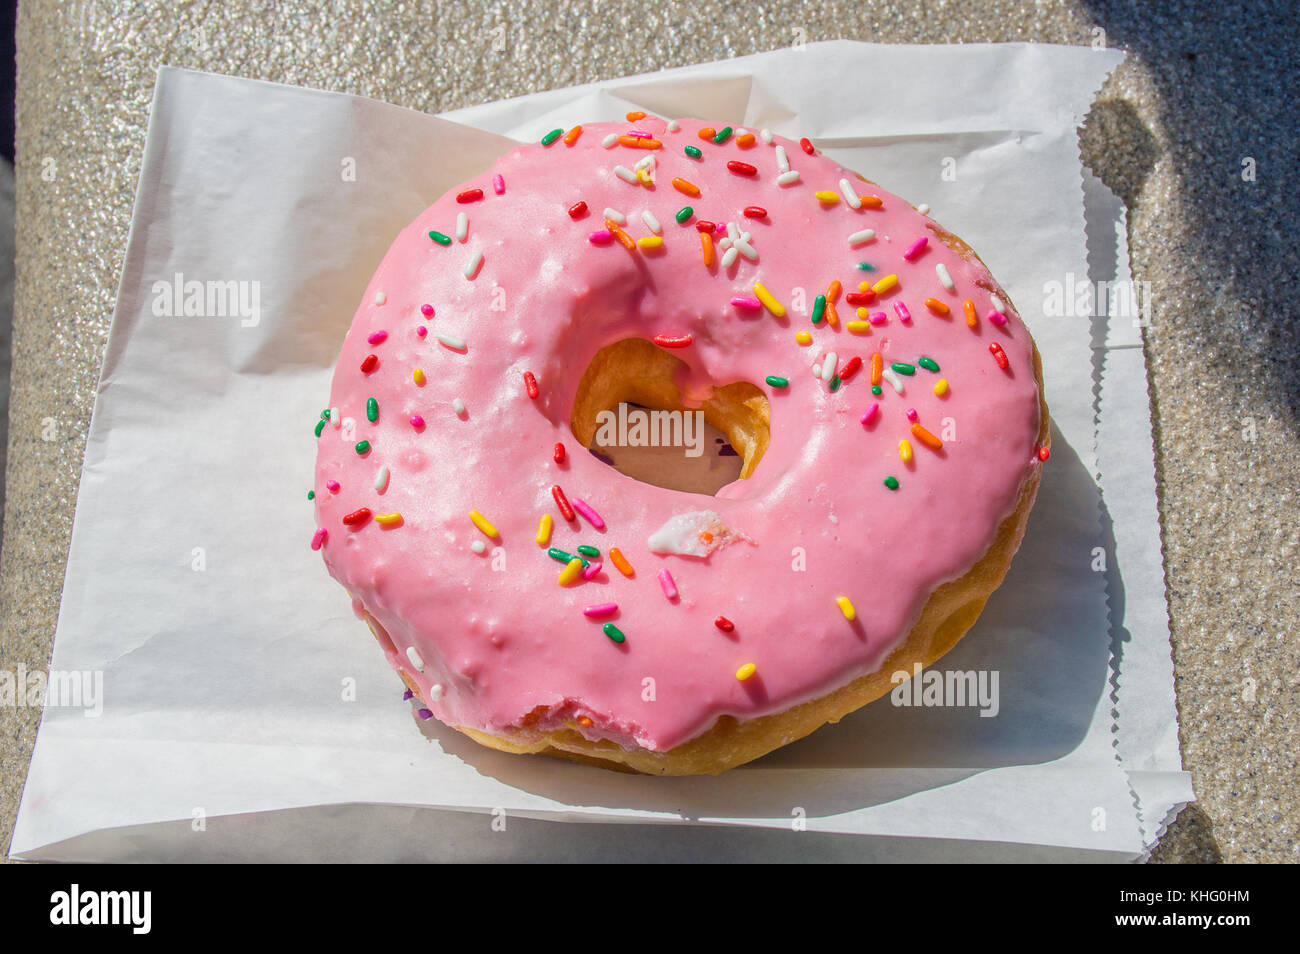 large pink iced donut on a paper bag Stock Photo